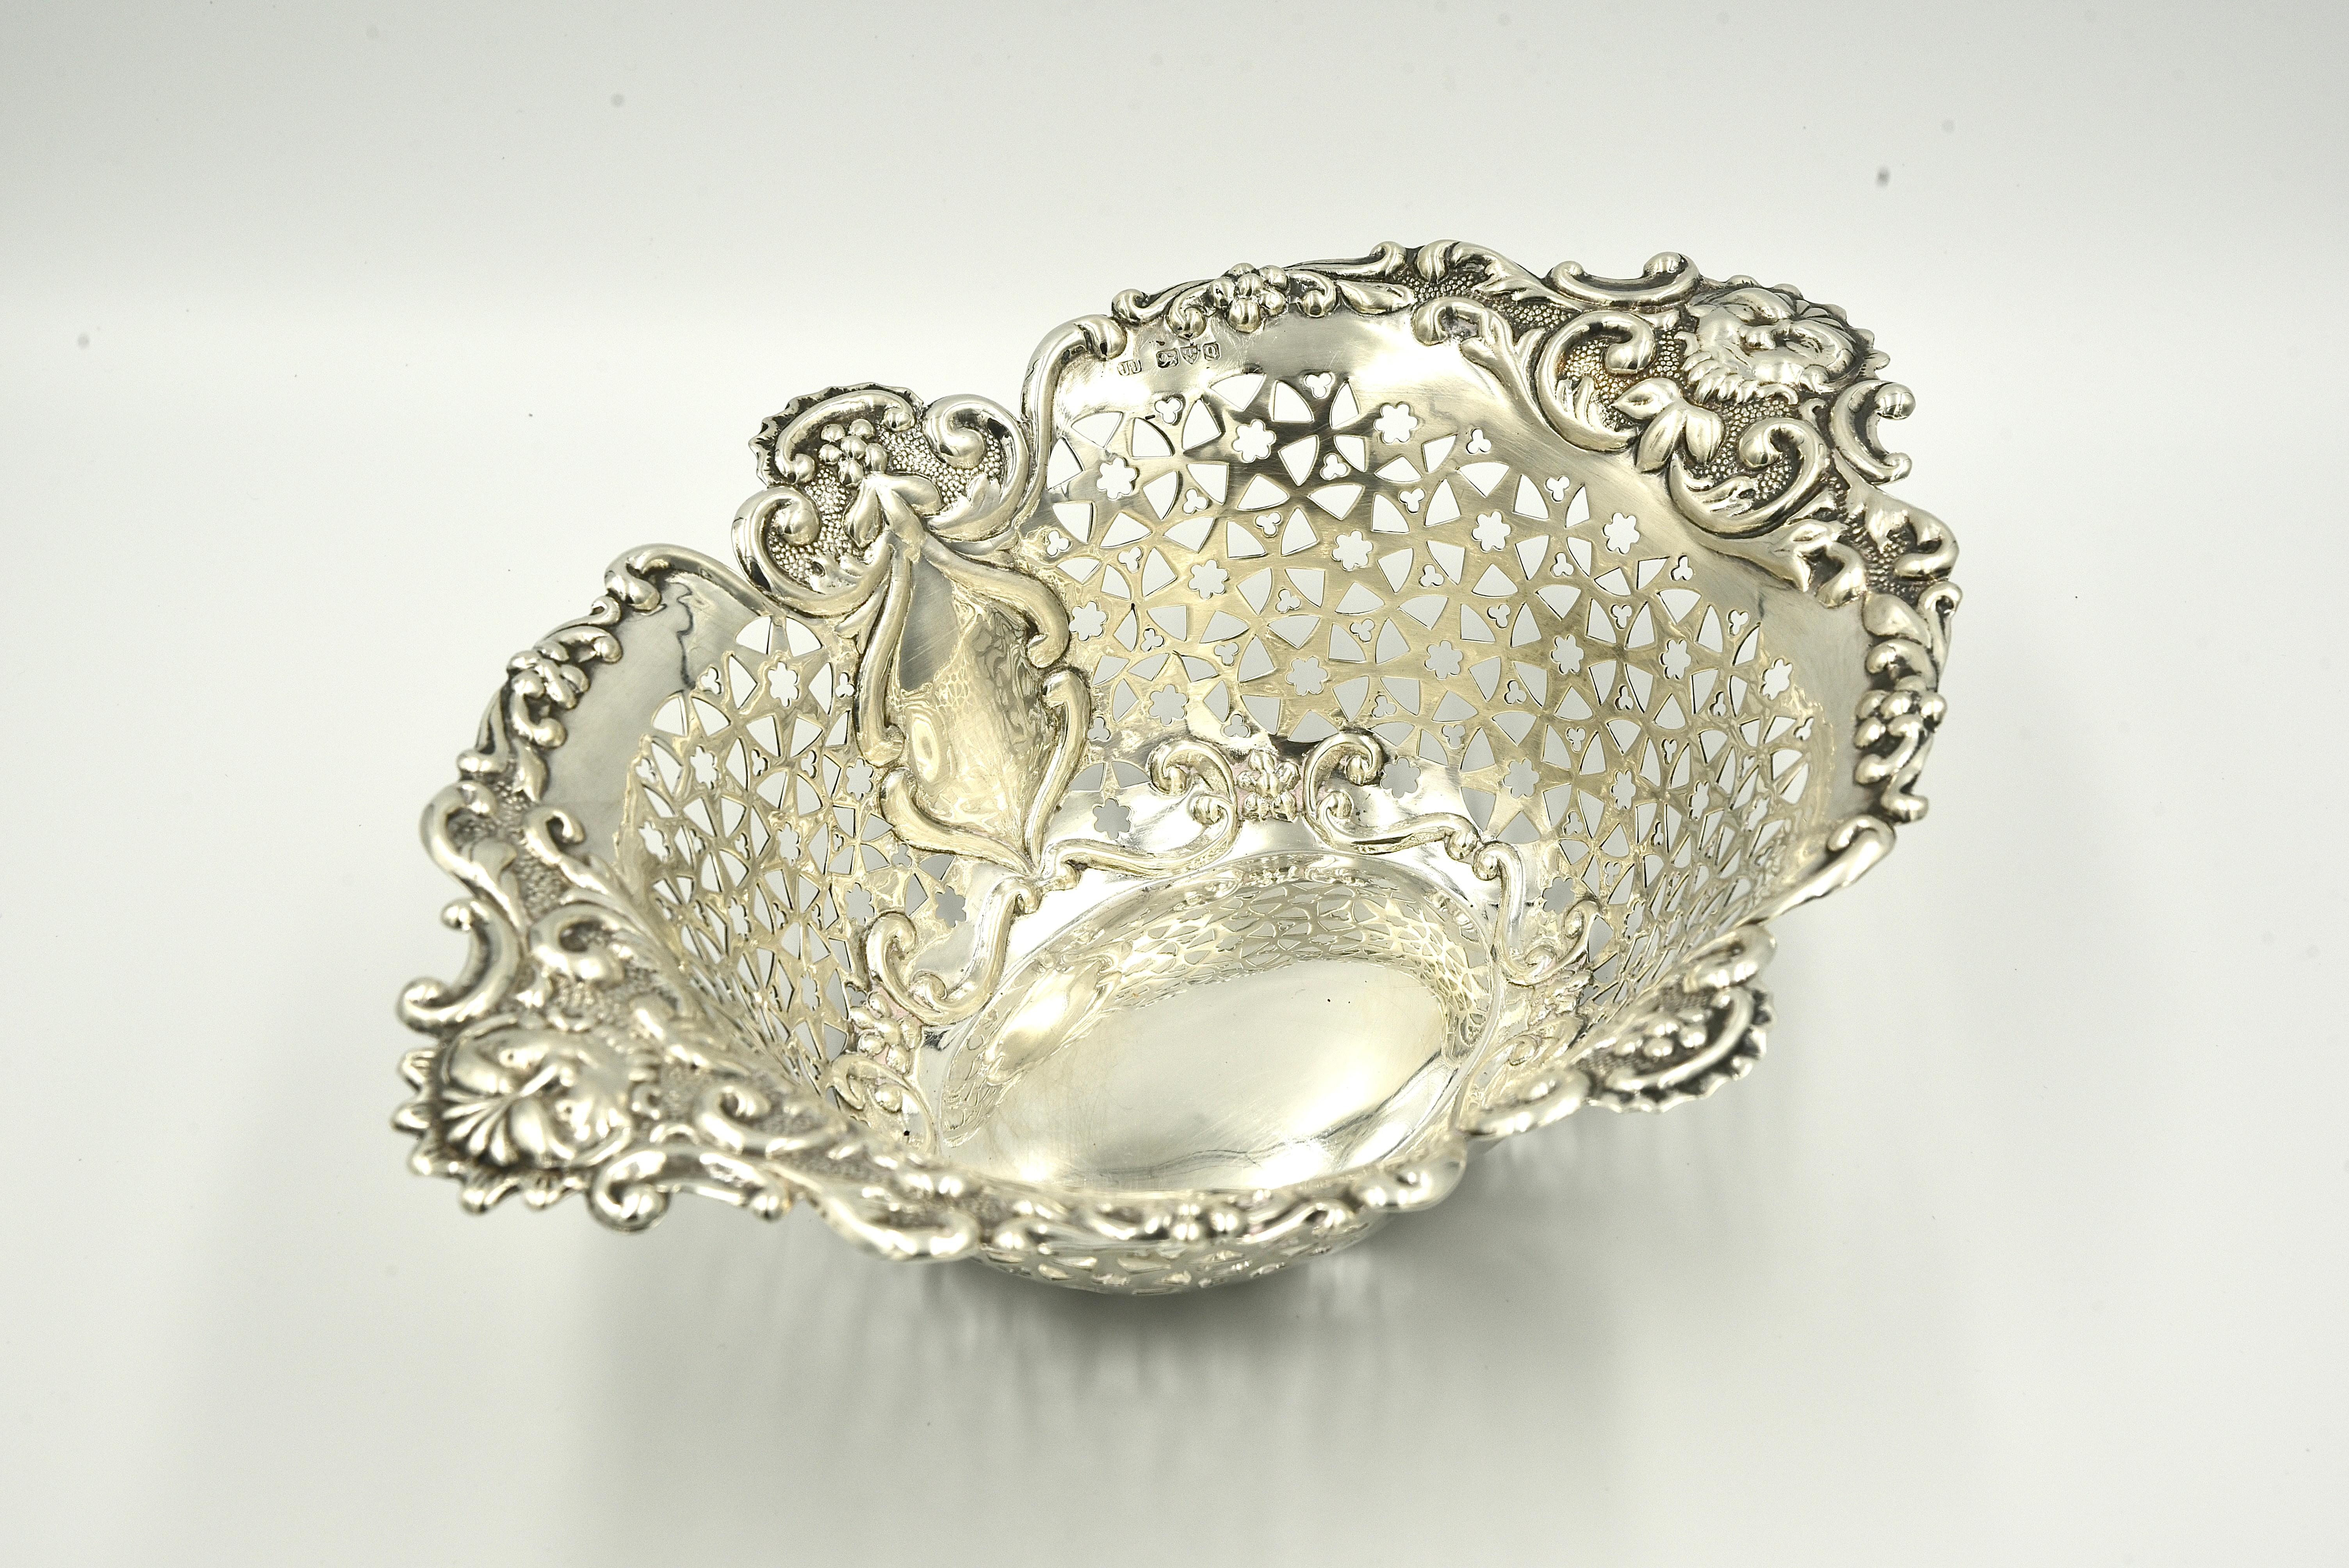 Rococo Revival 19th Century English Sterling silver fruit basket by James Charles Jay Chester  For Sale